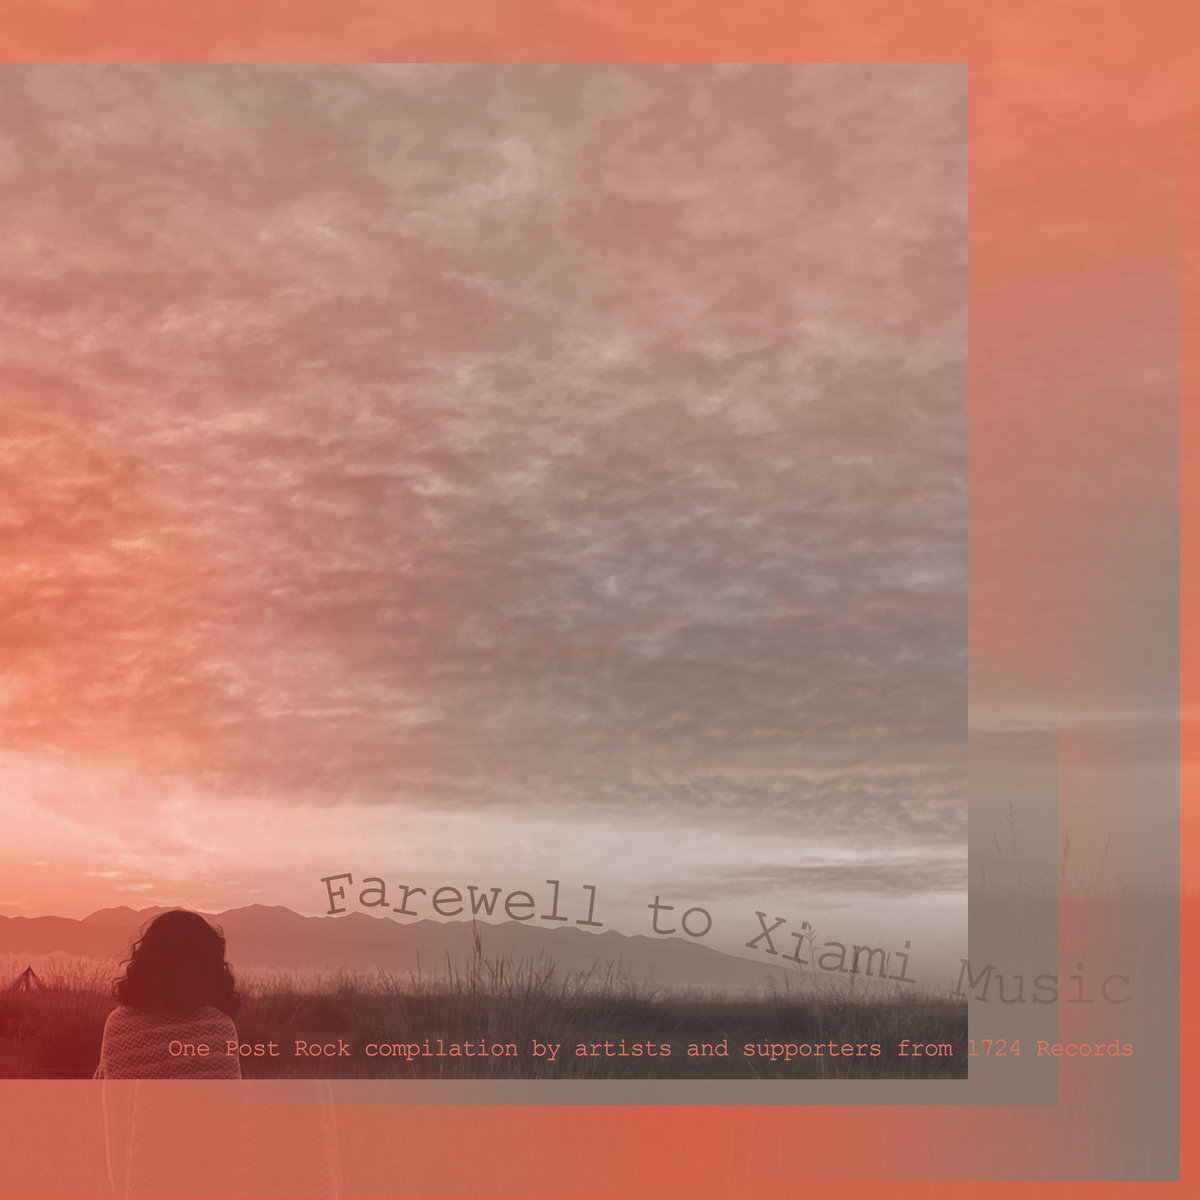 VA – Farewell to Xiami Music: One Post Rock compilation by artists and supporters from 1724 Records (2021) [FLAC]